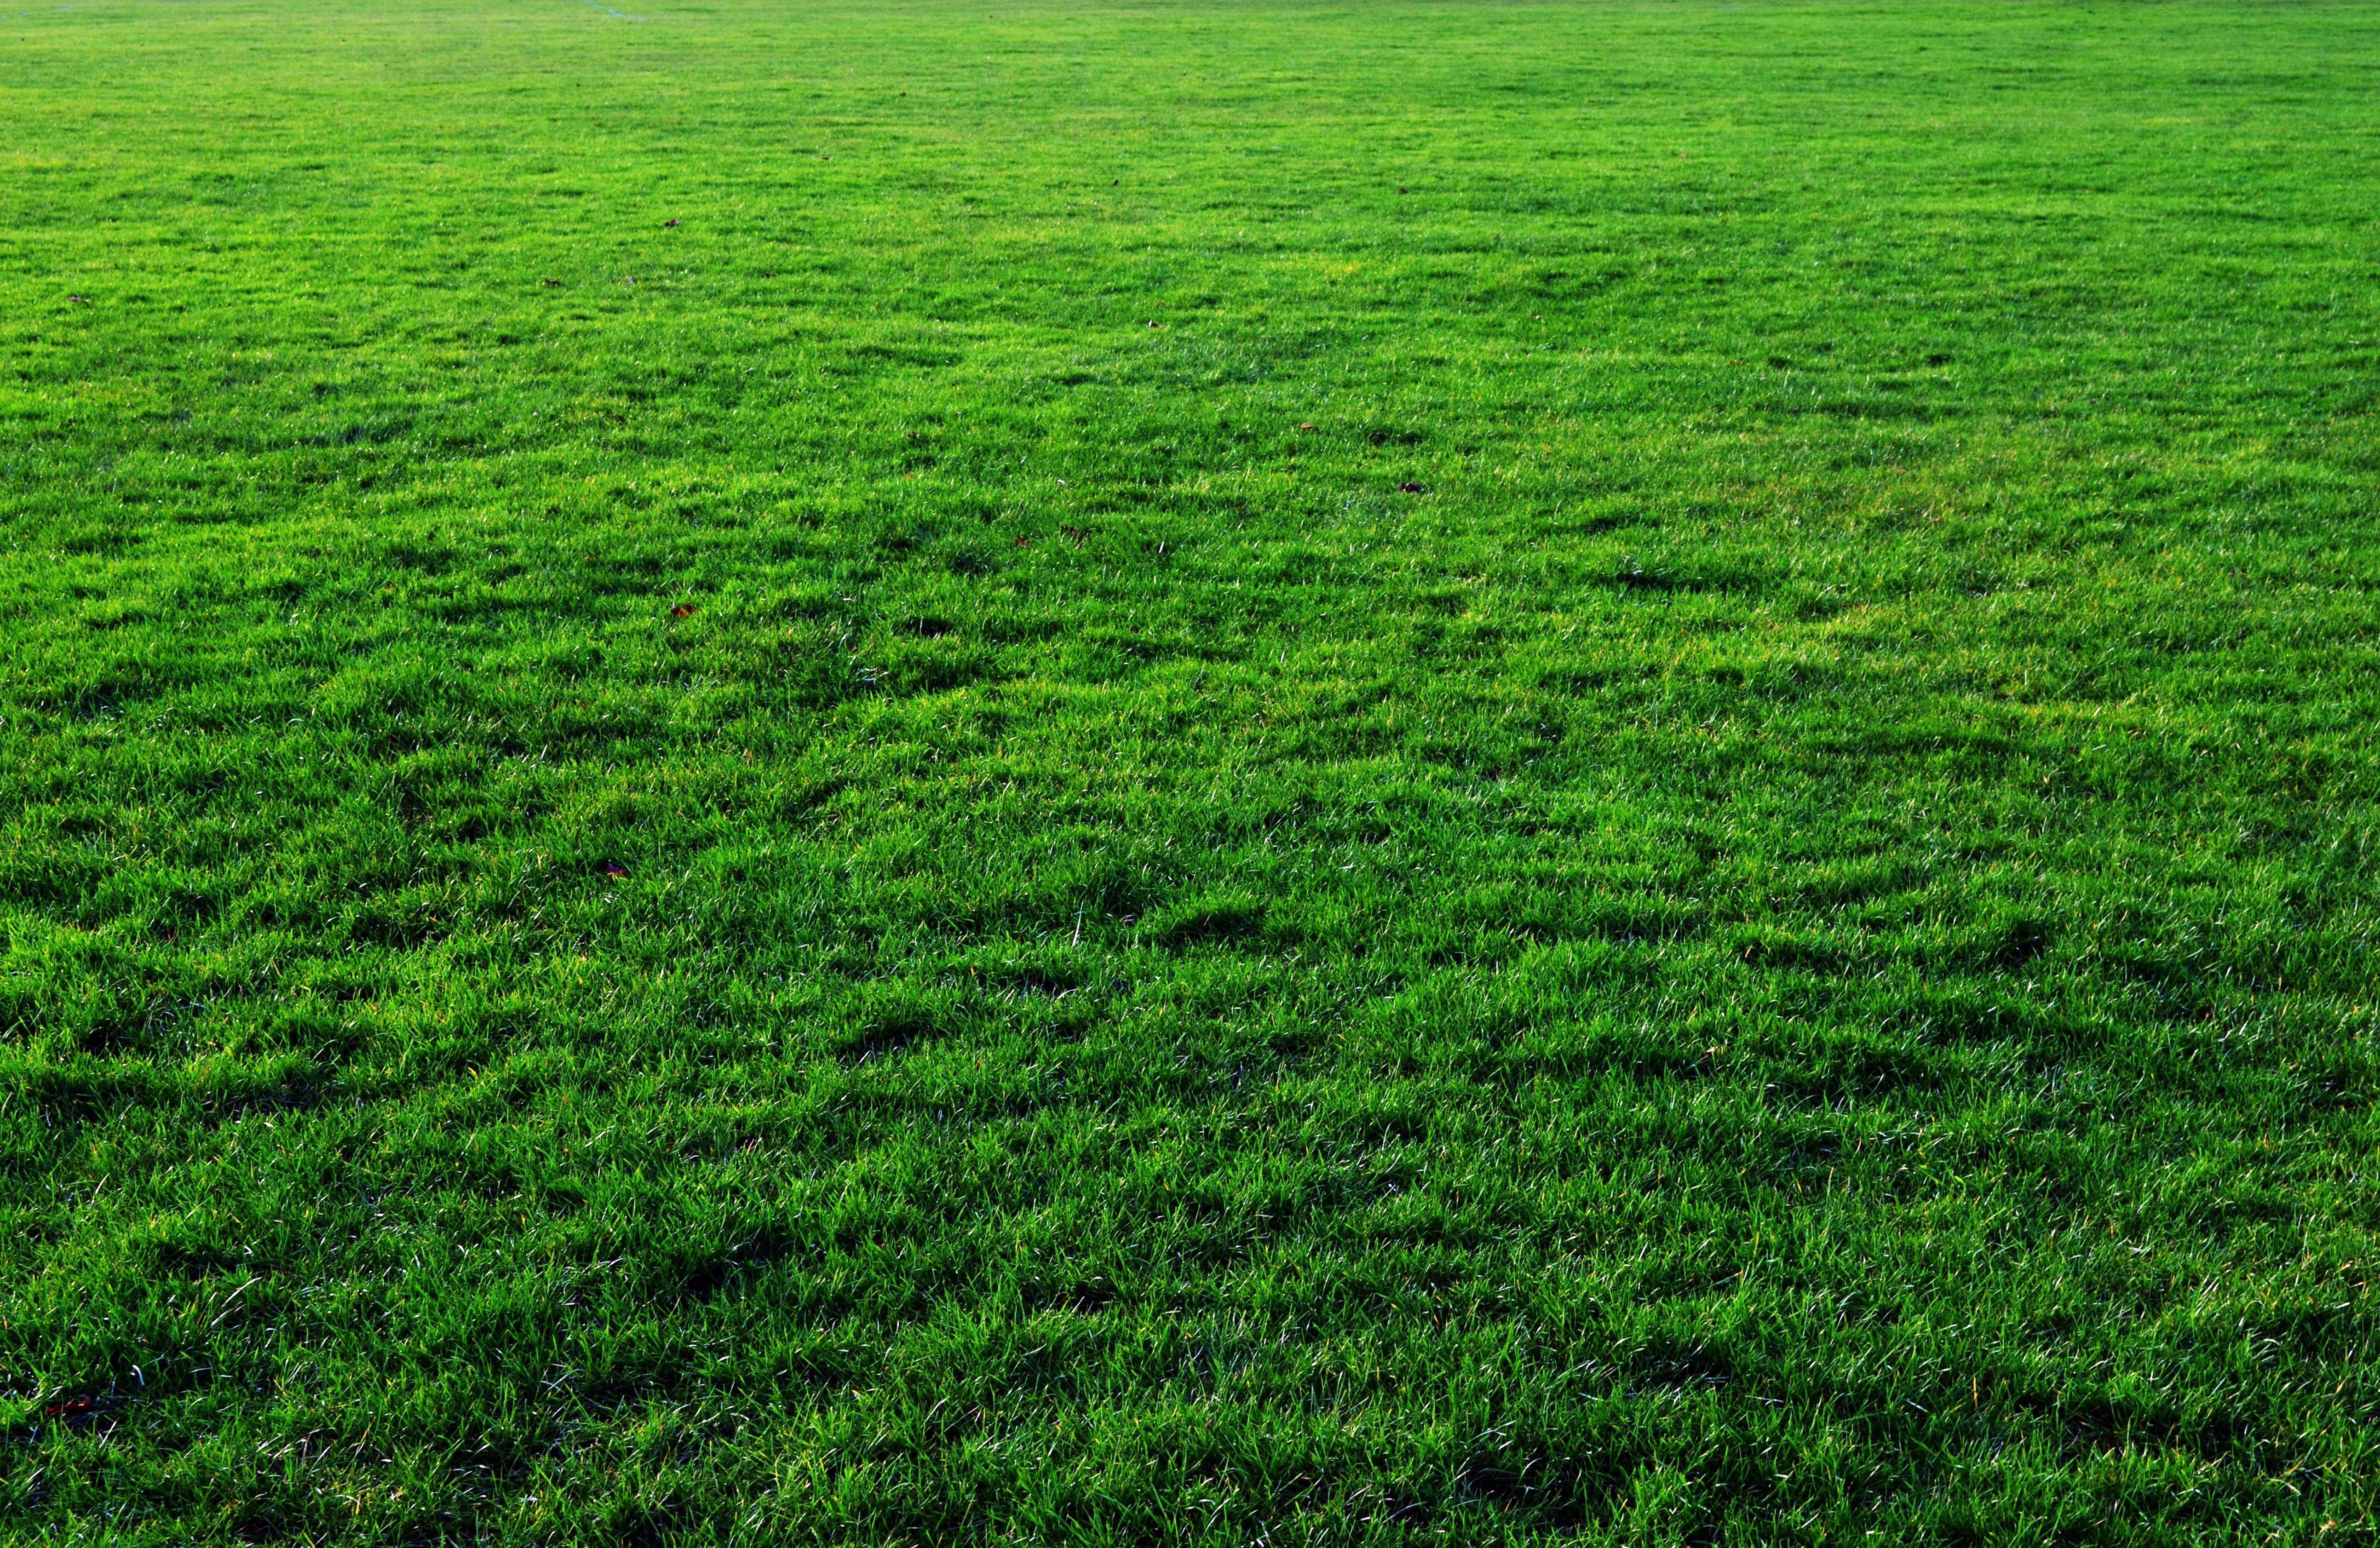 Seven Free Grass Textures or Lawn Background Images | www ...